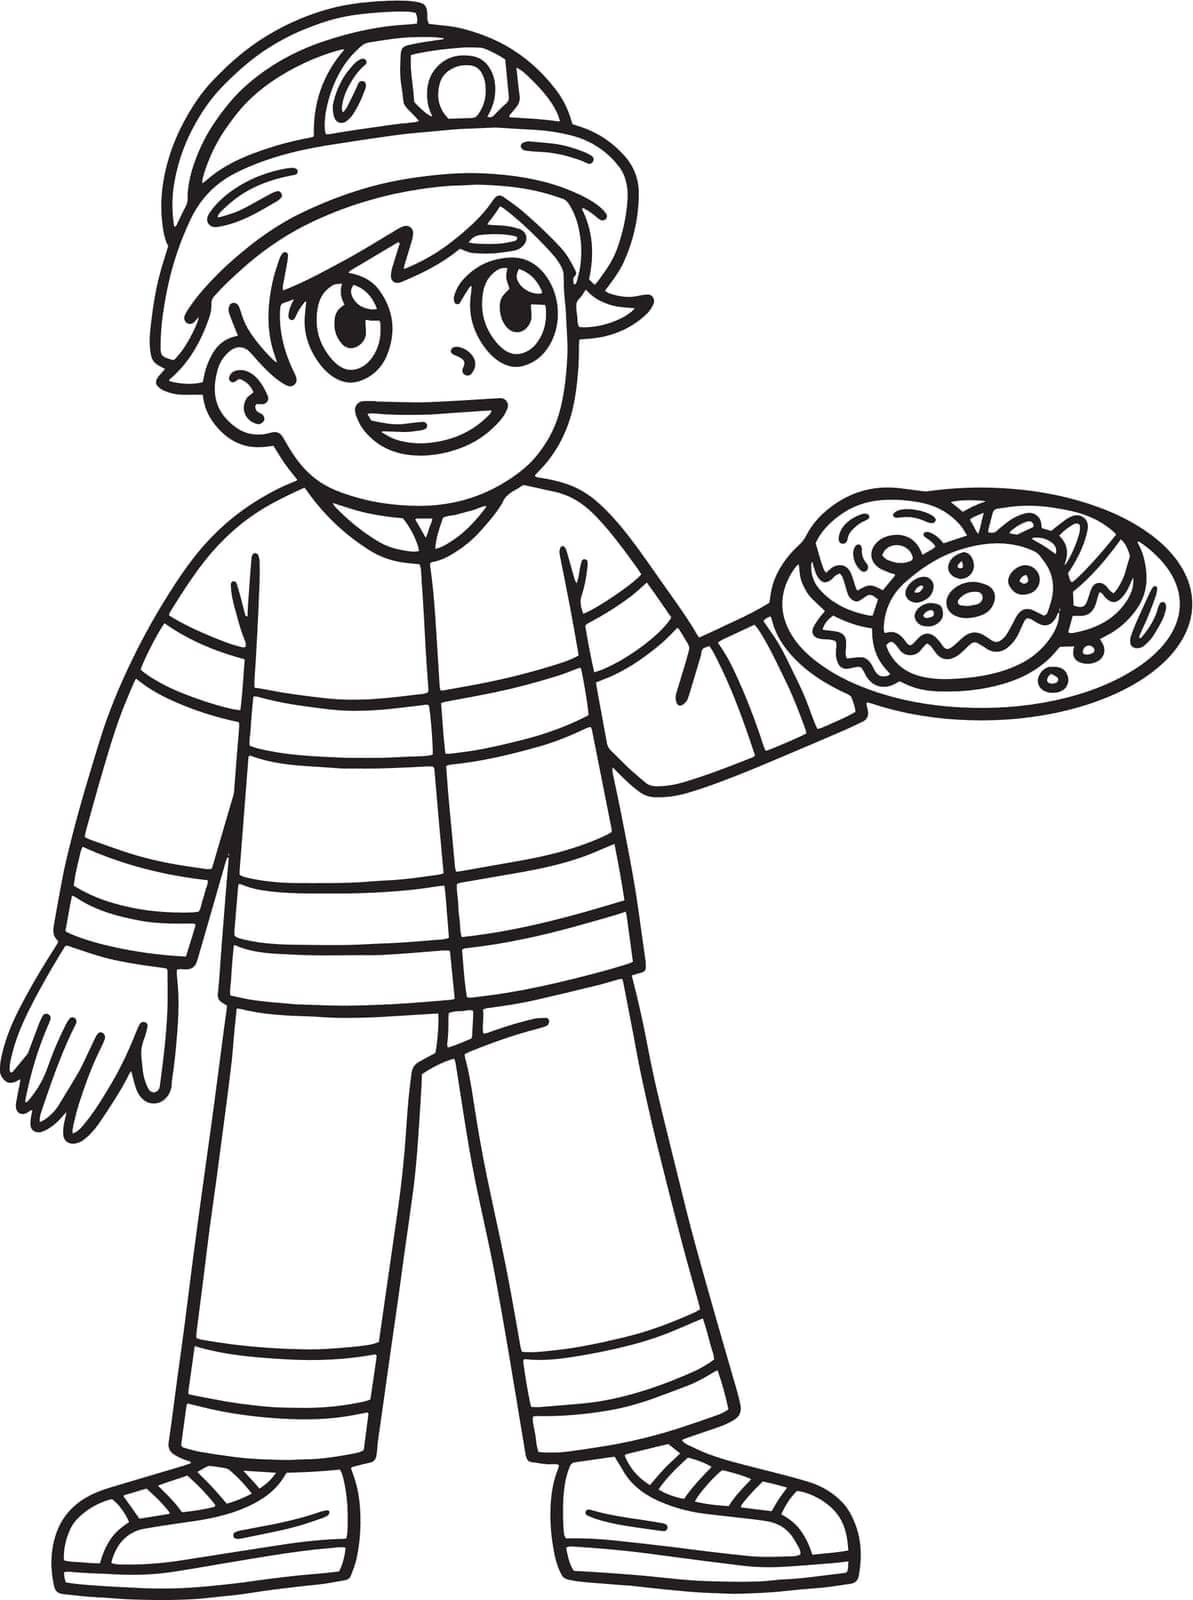 Firefighter Isolated Coloring Page for Kids by abbydesign